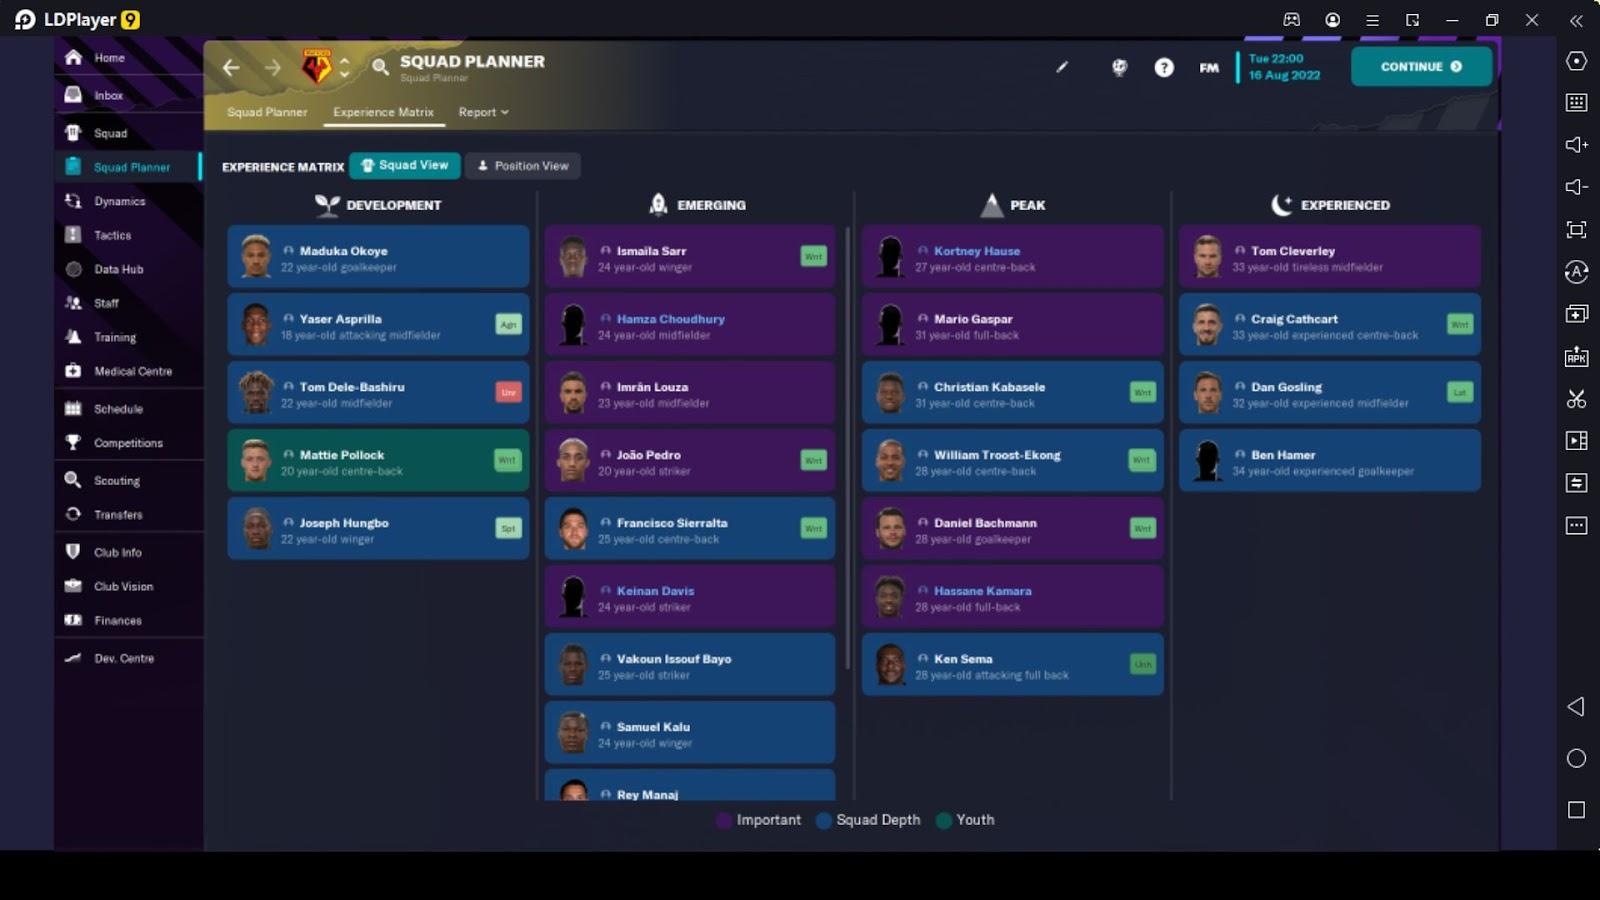 Help me create a good tactic, according to my team. - Football Manager 2023  Mobile - FMM Vibe